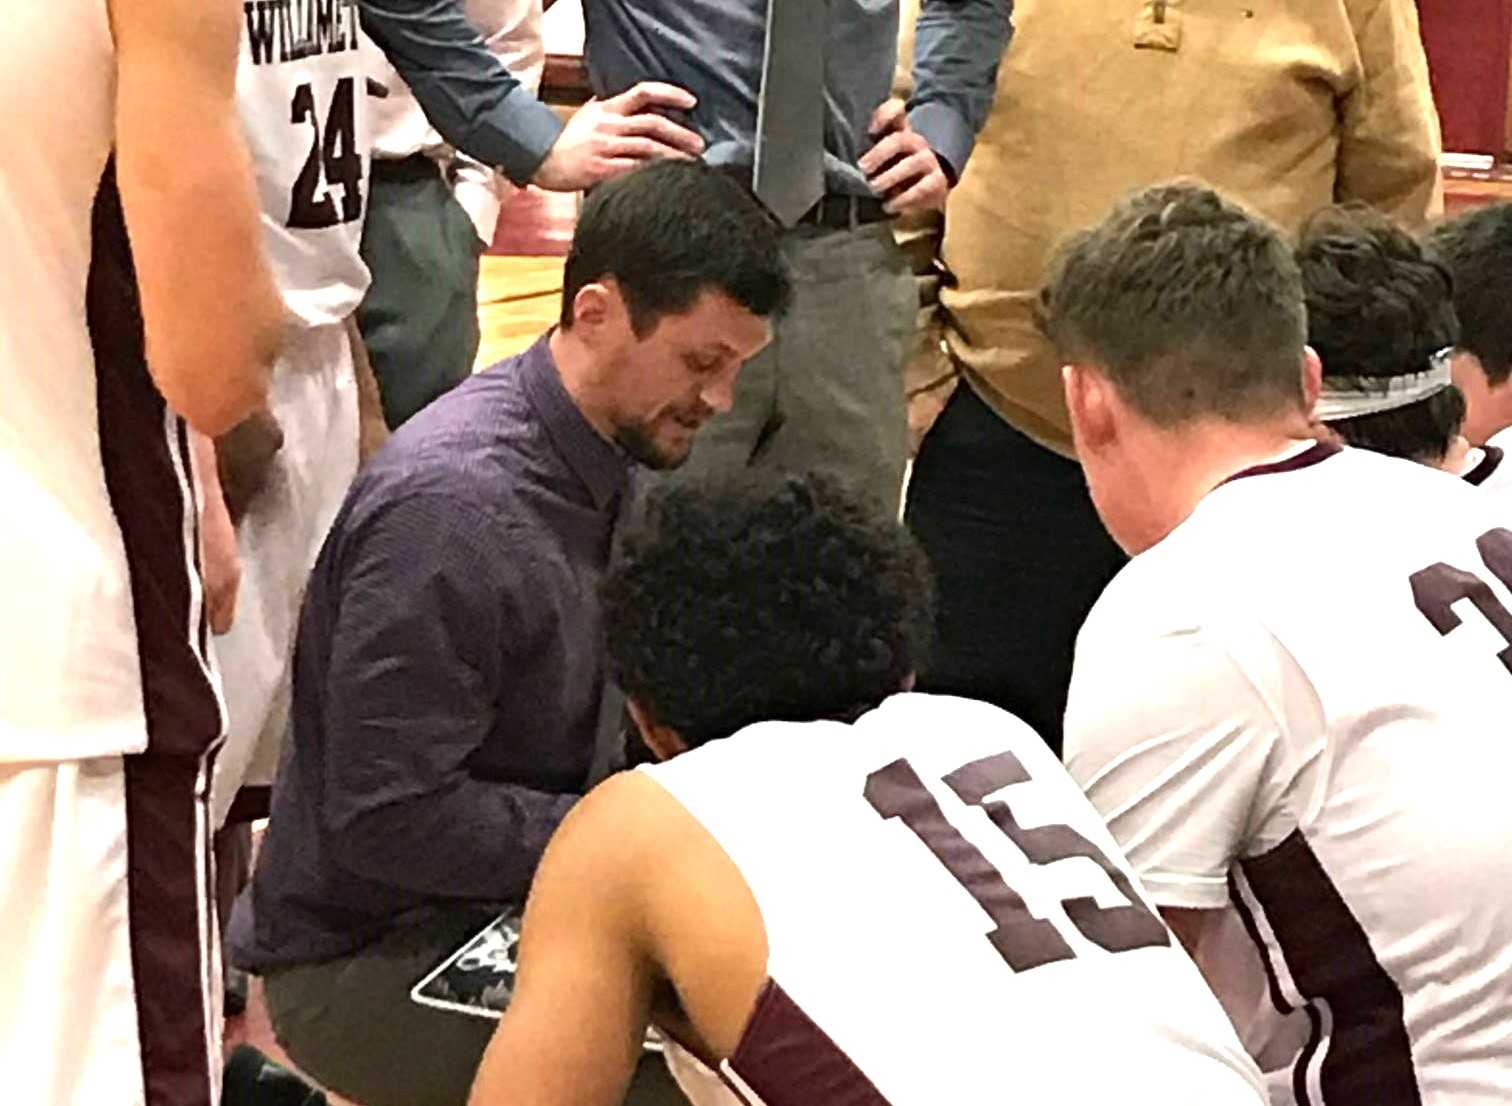 Chad Carpenter coached Willamette's boys for the last 11 seasons, leading them to six state playoff appearances.